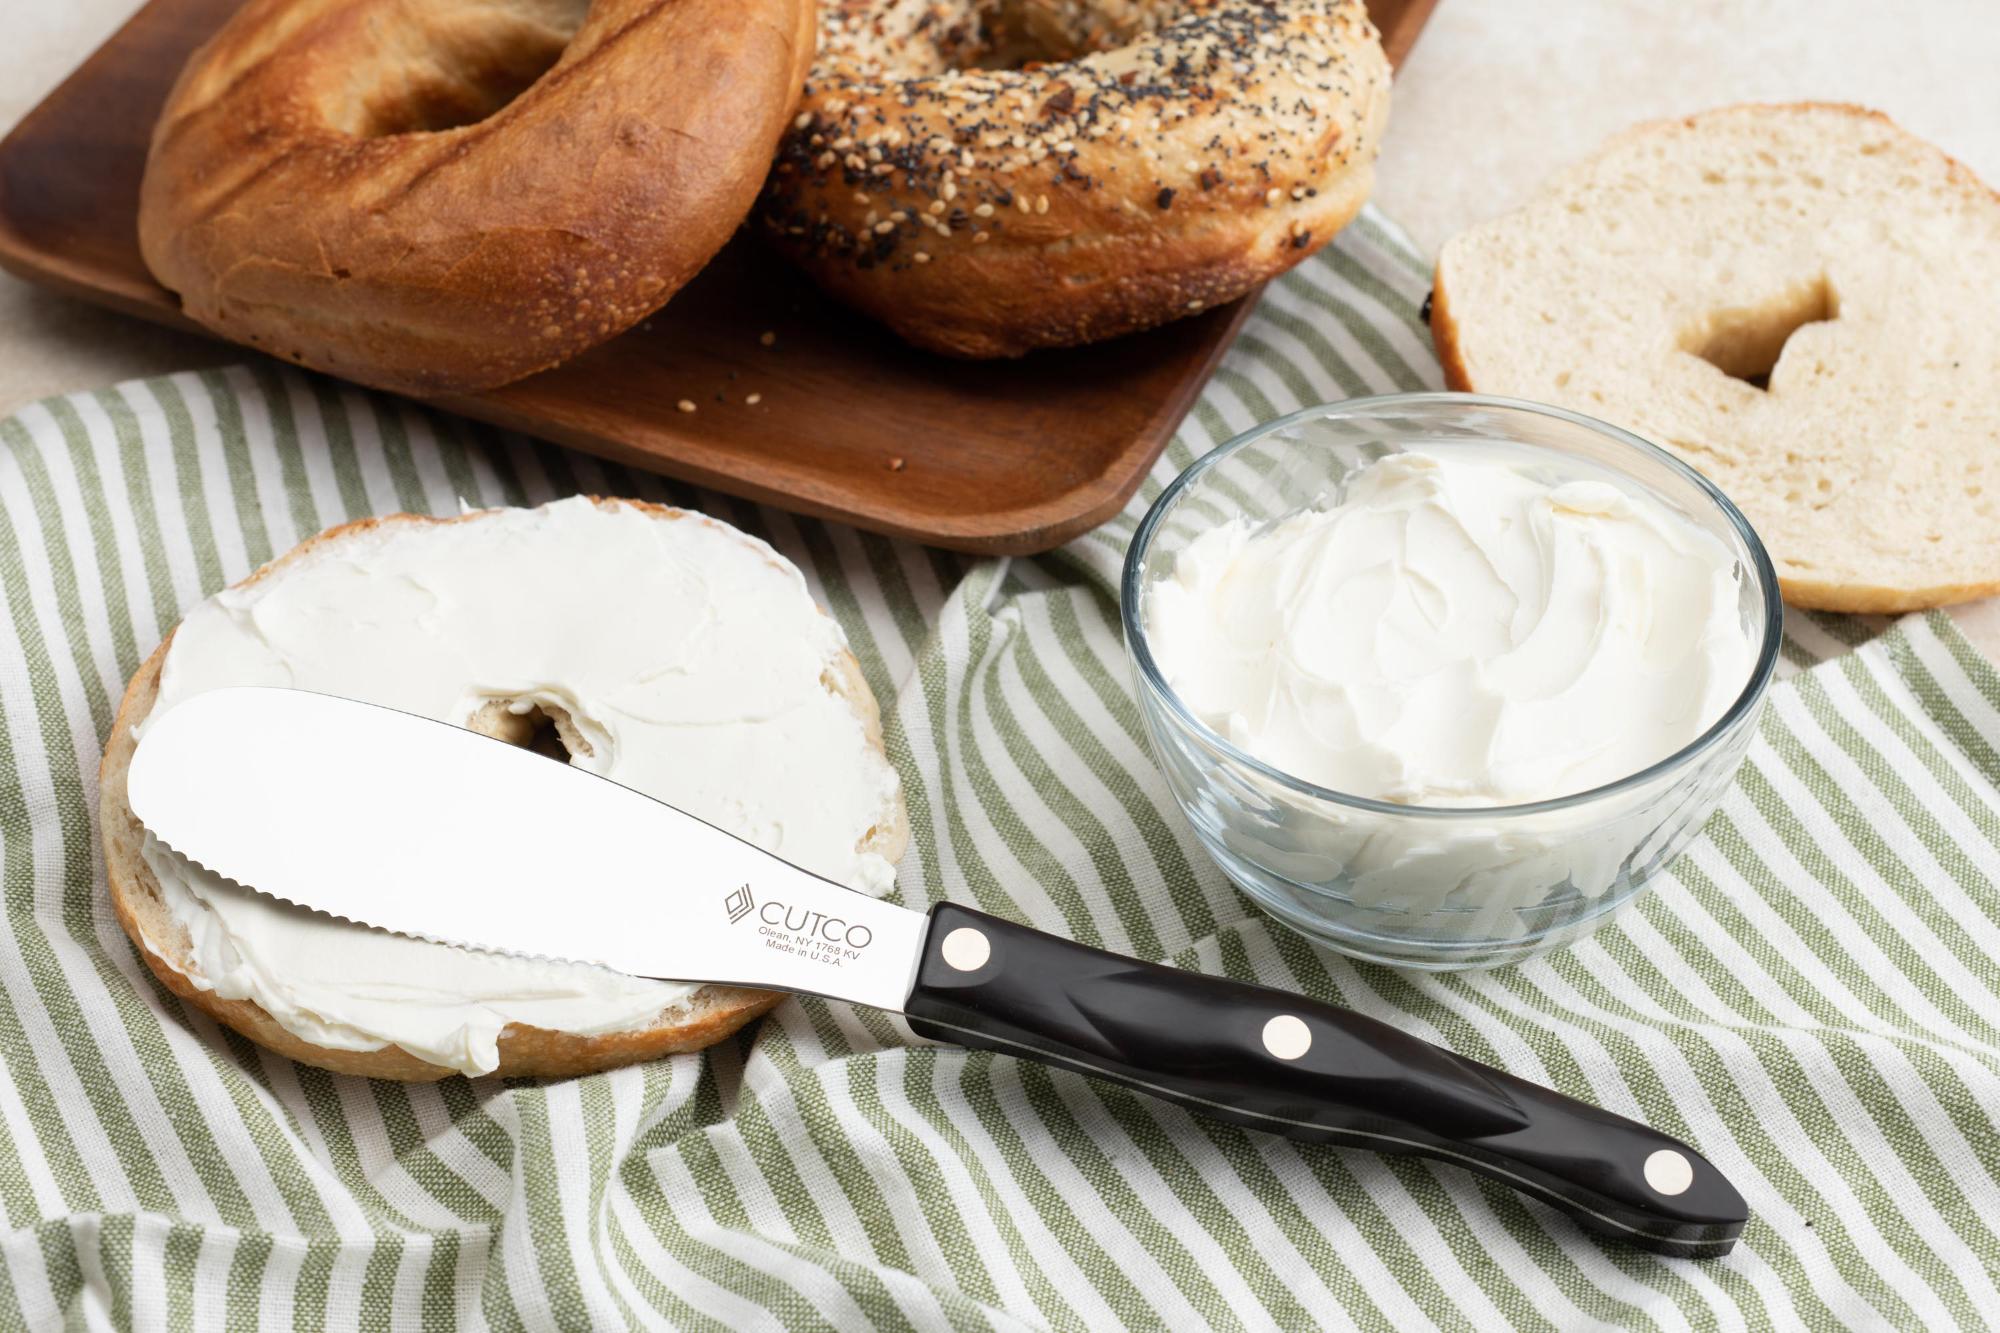 The Spatula Spreader is great for spreading cream cheese.